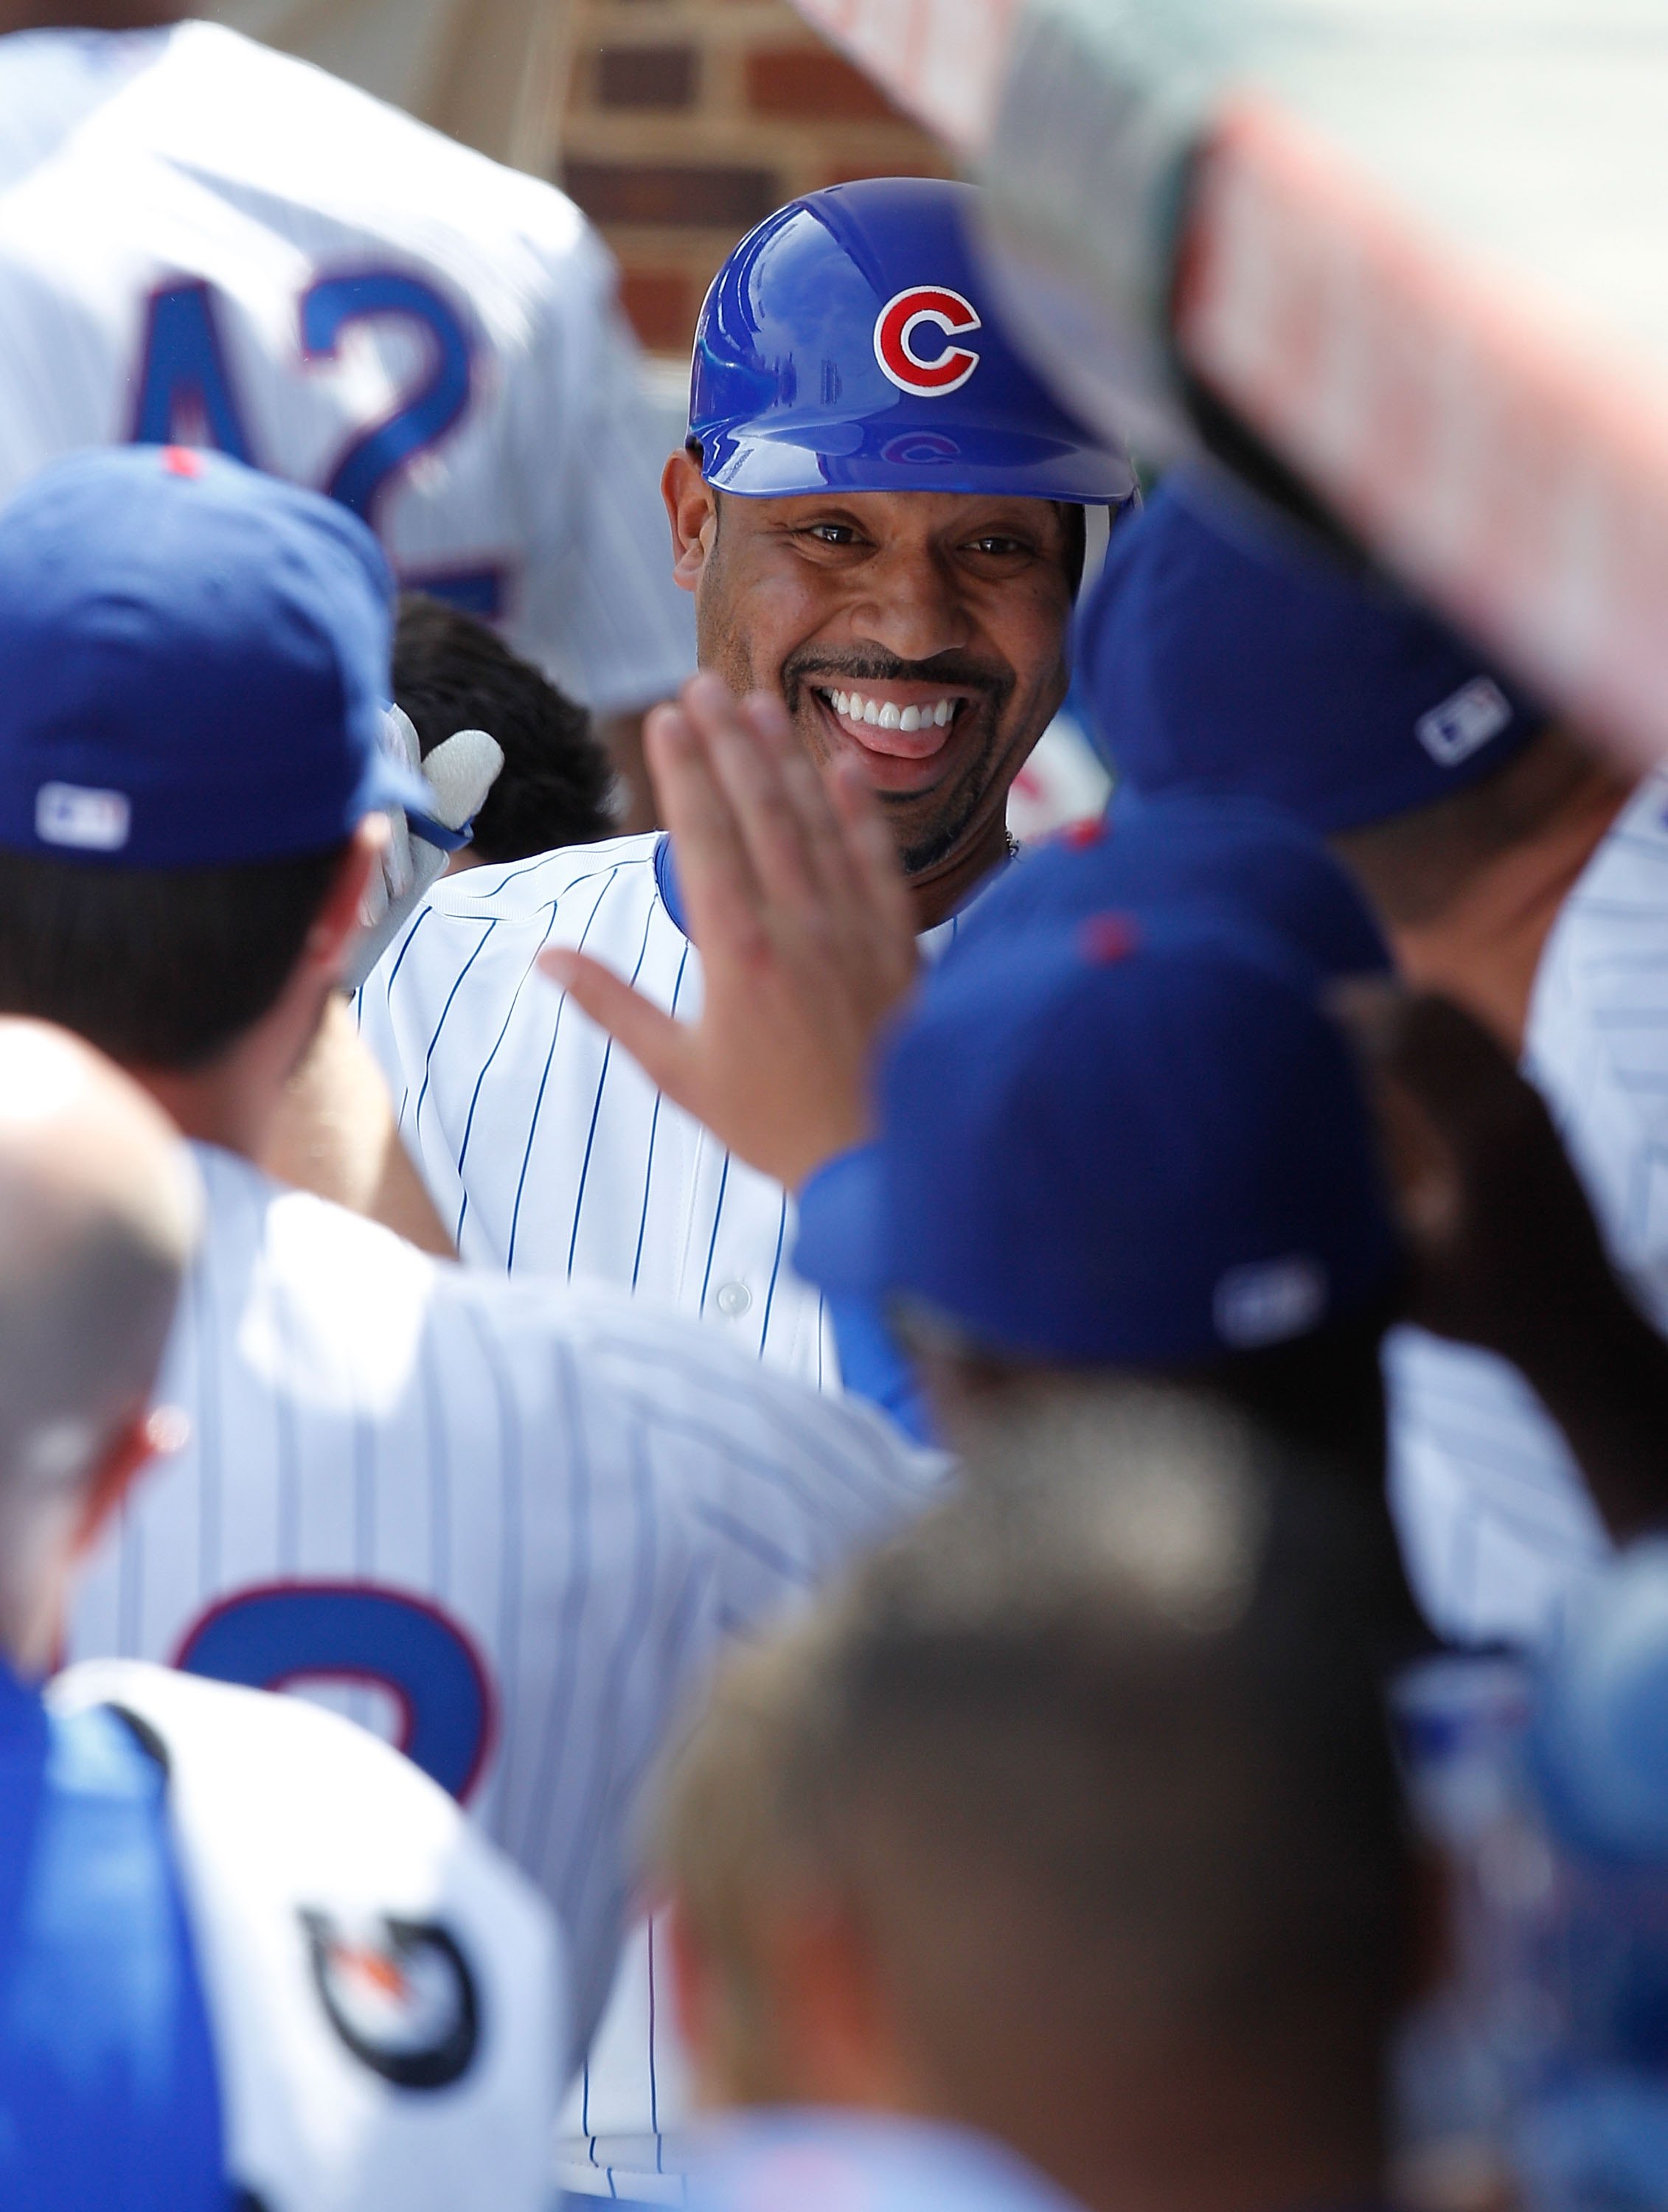 CHICAGO - APRIL 15: Derrek Lee of the Chicago Cubs, wearing a number 42 jersey in honor of Jackie Robinson, is greeted by teammates in the dugout after hitting a home run in the 1st inning against the Milwaukee Brewers at Wrigley Field on April 15, 2010 i